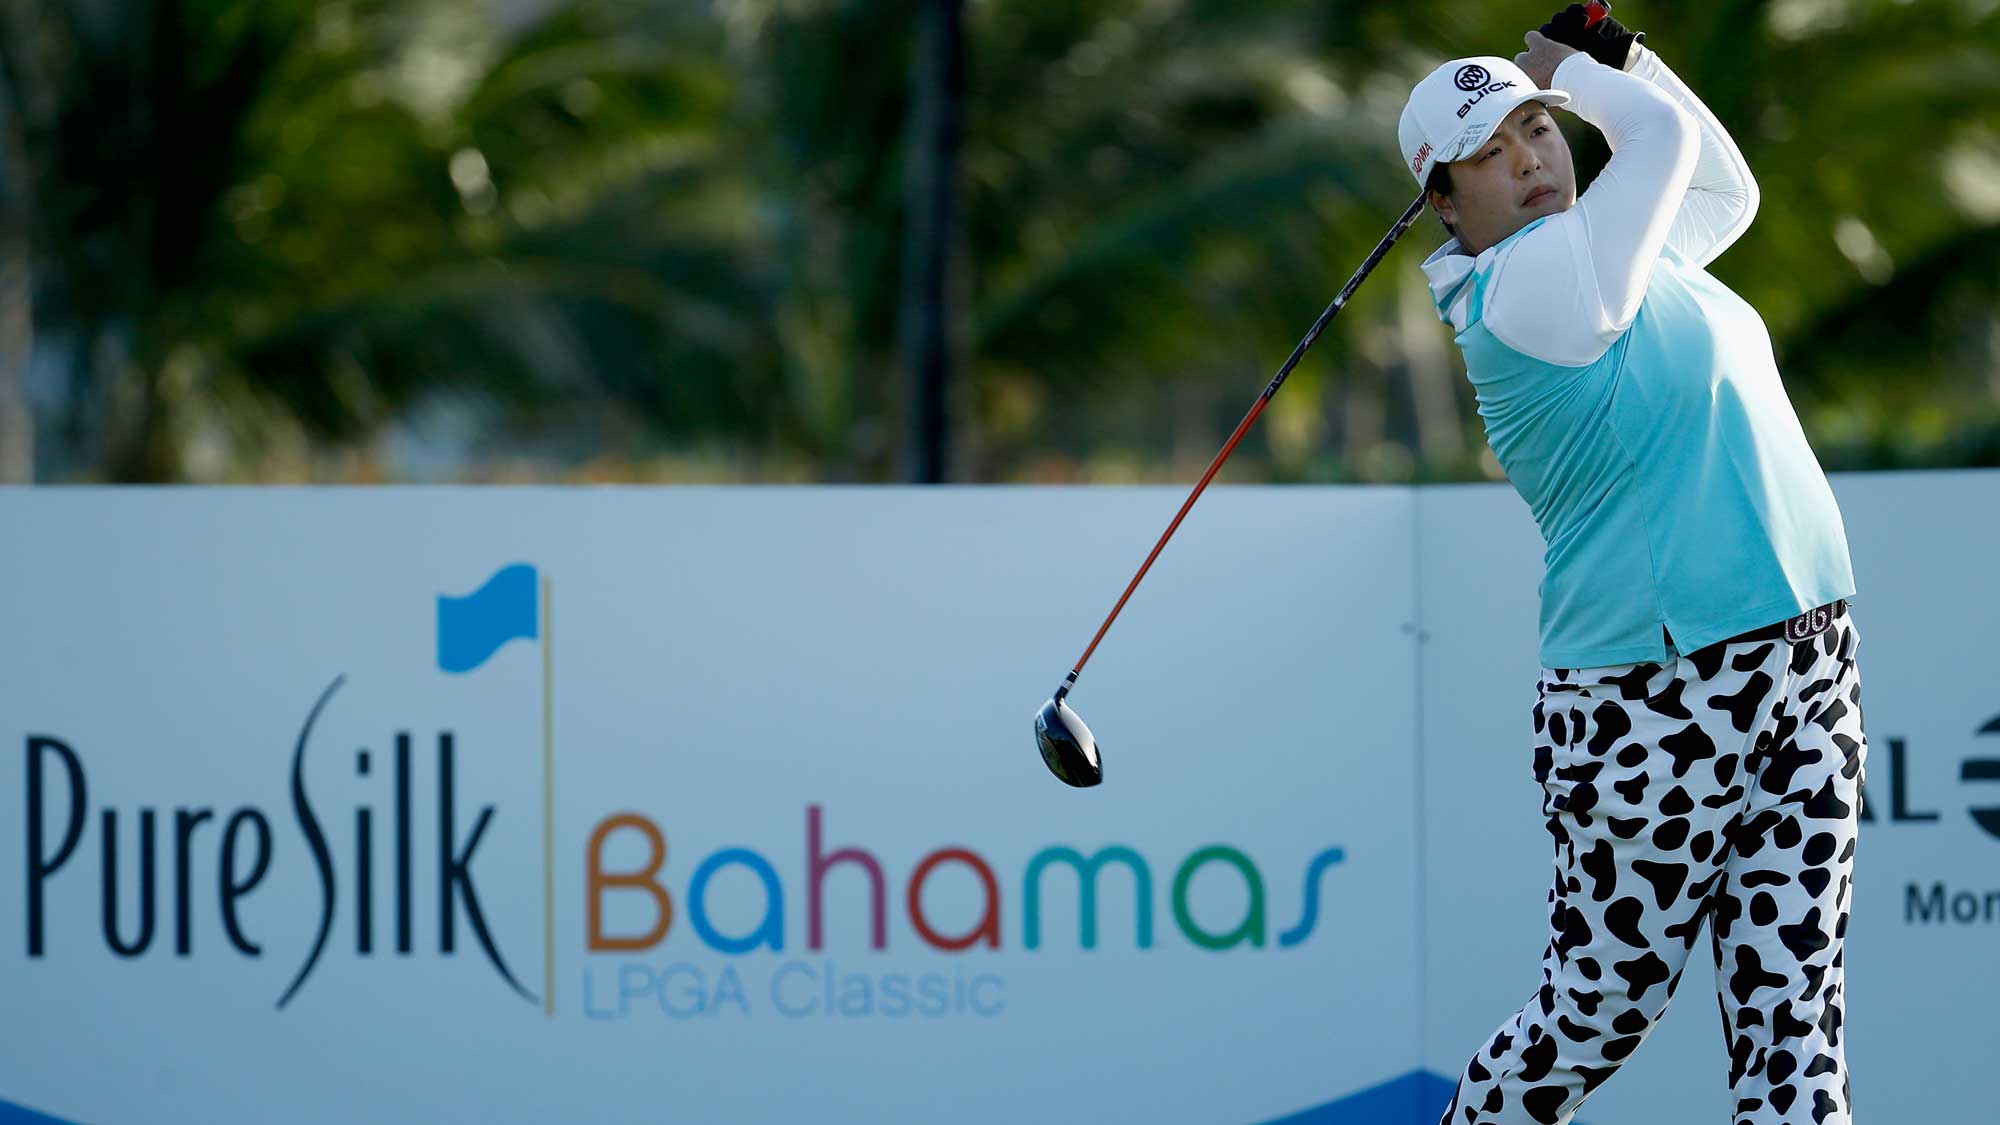 Shanshan Feng of China hits her tee shot on the 15th hole during the second round of the Pure Silk Bahamas LPGA Classic